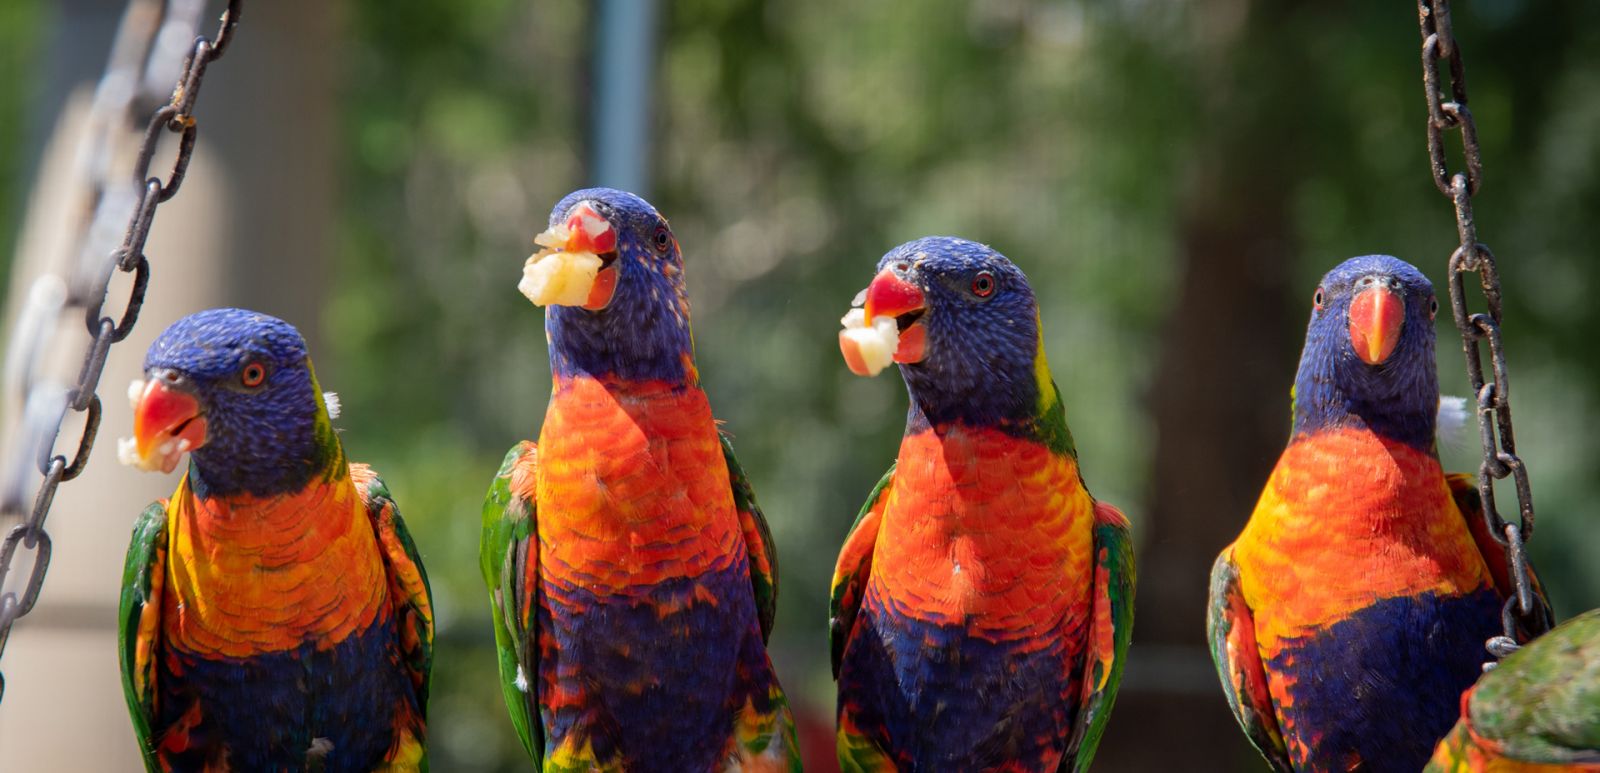 4x rainbow lorikeets eating some fruit in a line